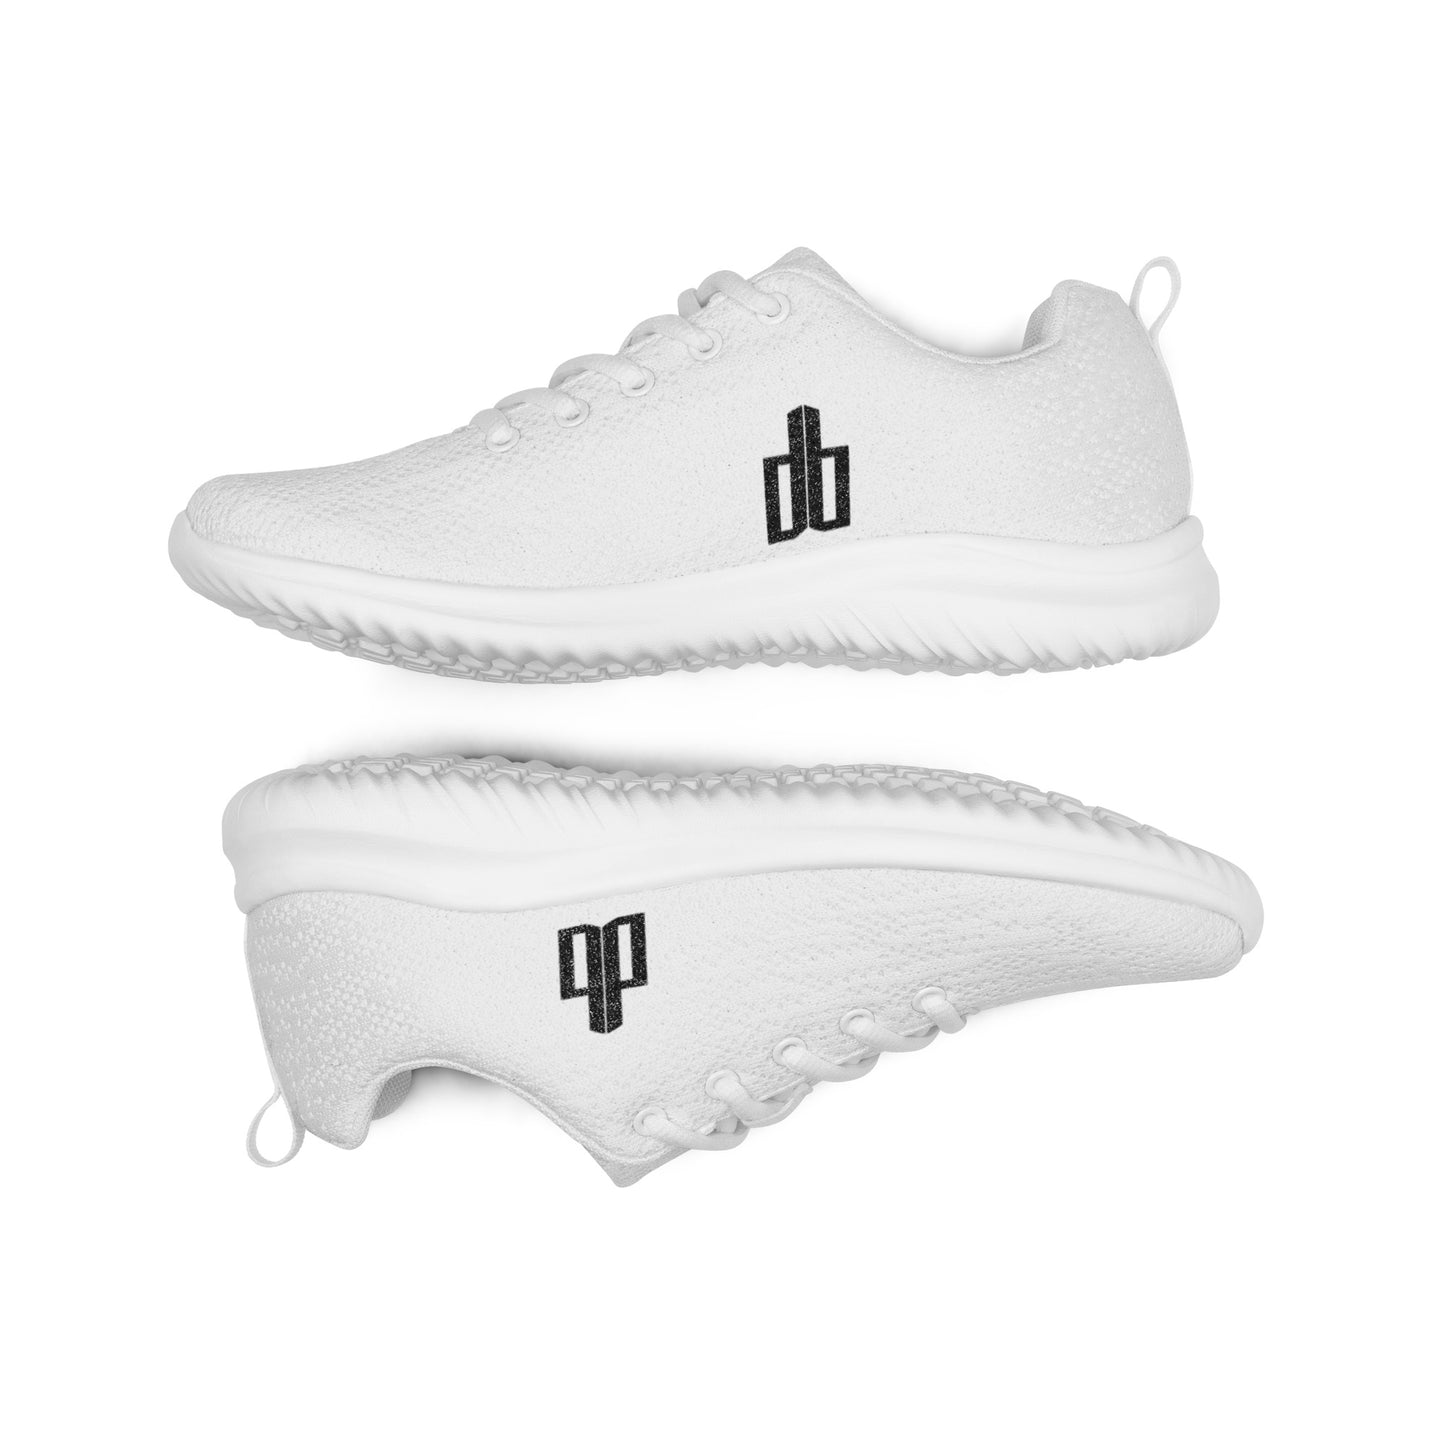 "COURT ONE" Women’s ultralight athletic shoes